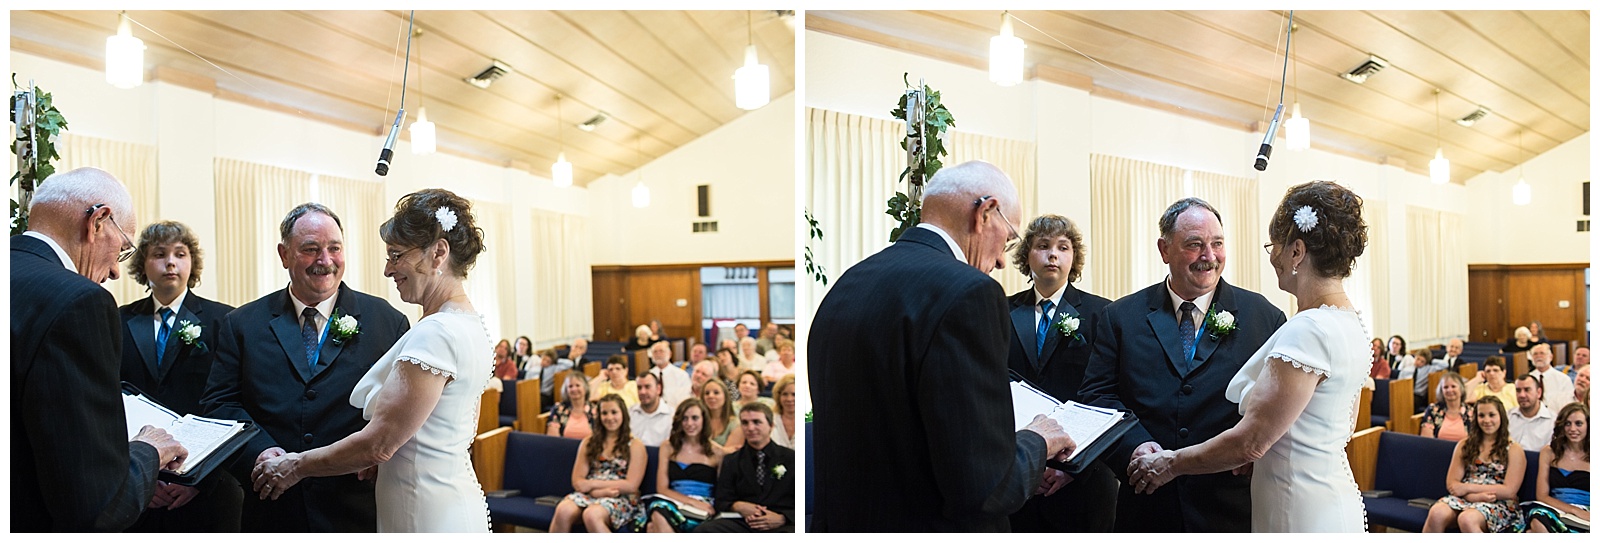 A wedding at Eden Heights Community of Christ in Independence, Missouri.